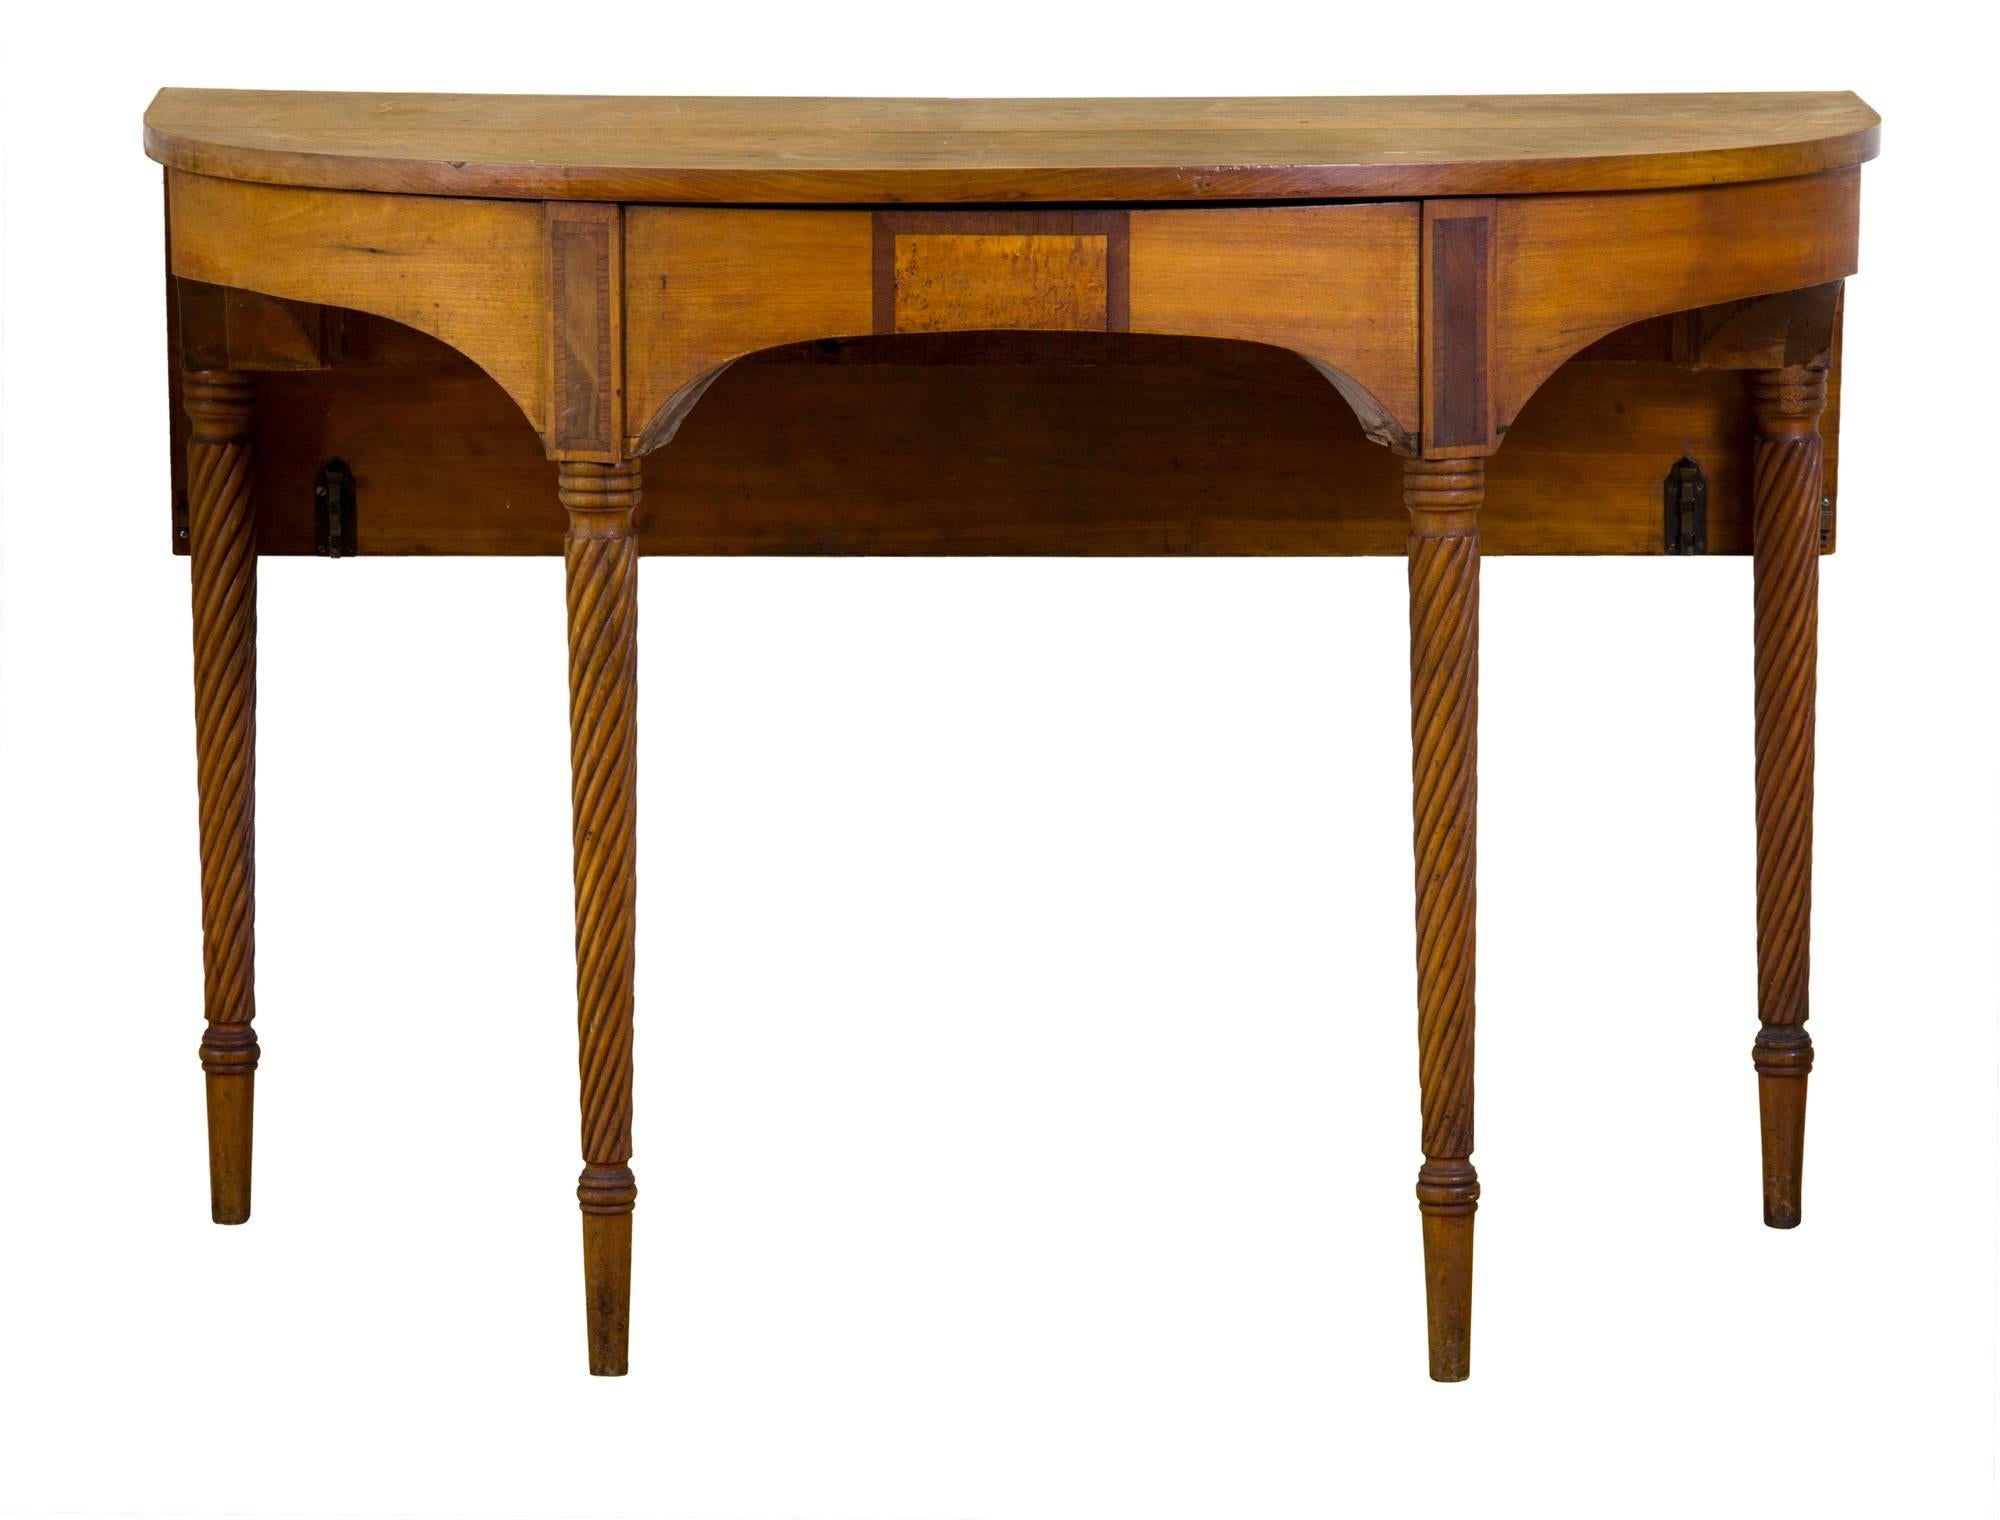 This is a “country-fied” version of the formal Federal style dining table which was popularized at the turn of the 19th century, and remained in style for 20-30 years.  This table has striking looks; its top is solid cherry wood that has turned a